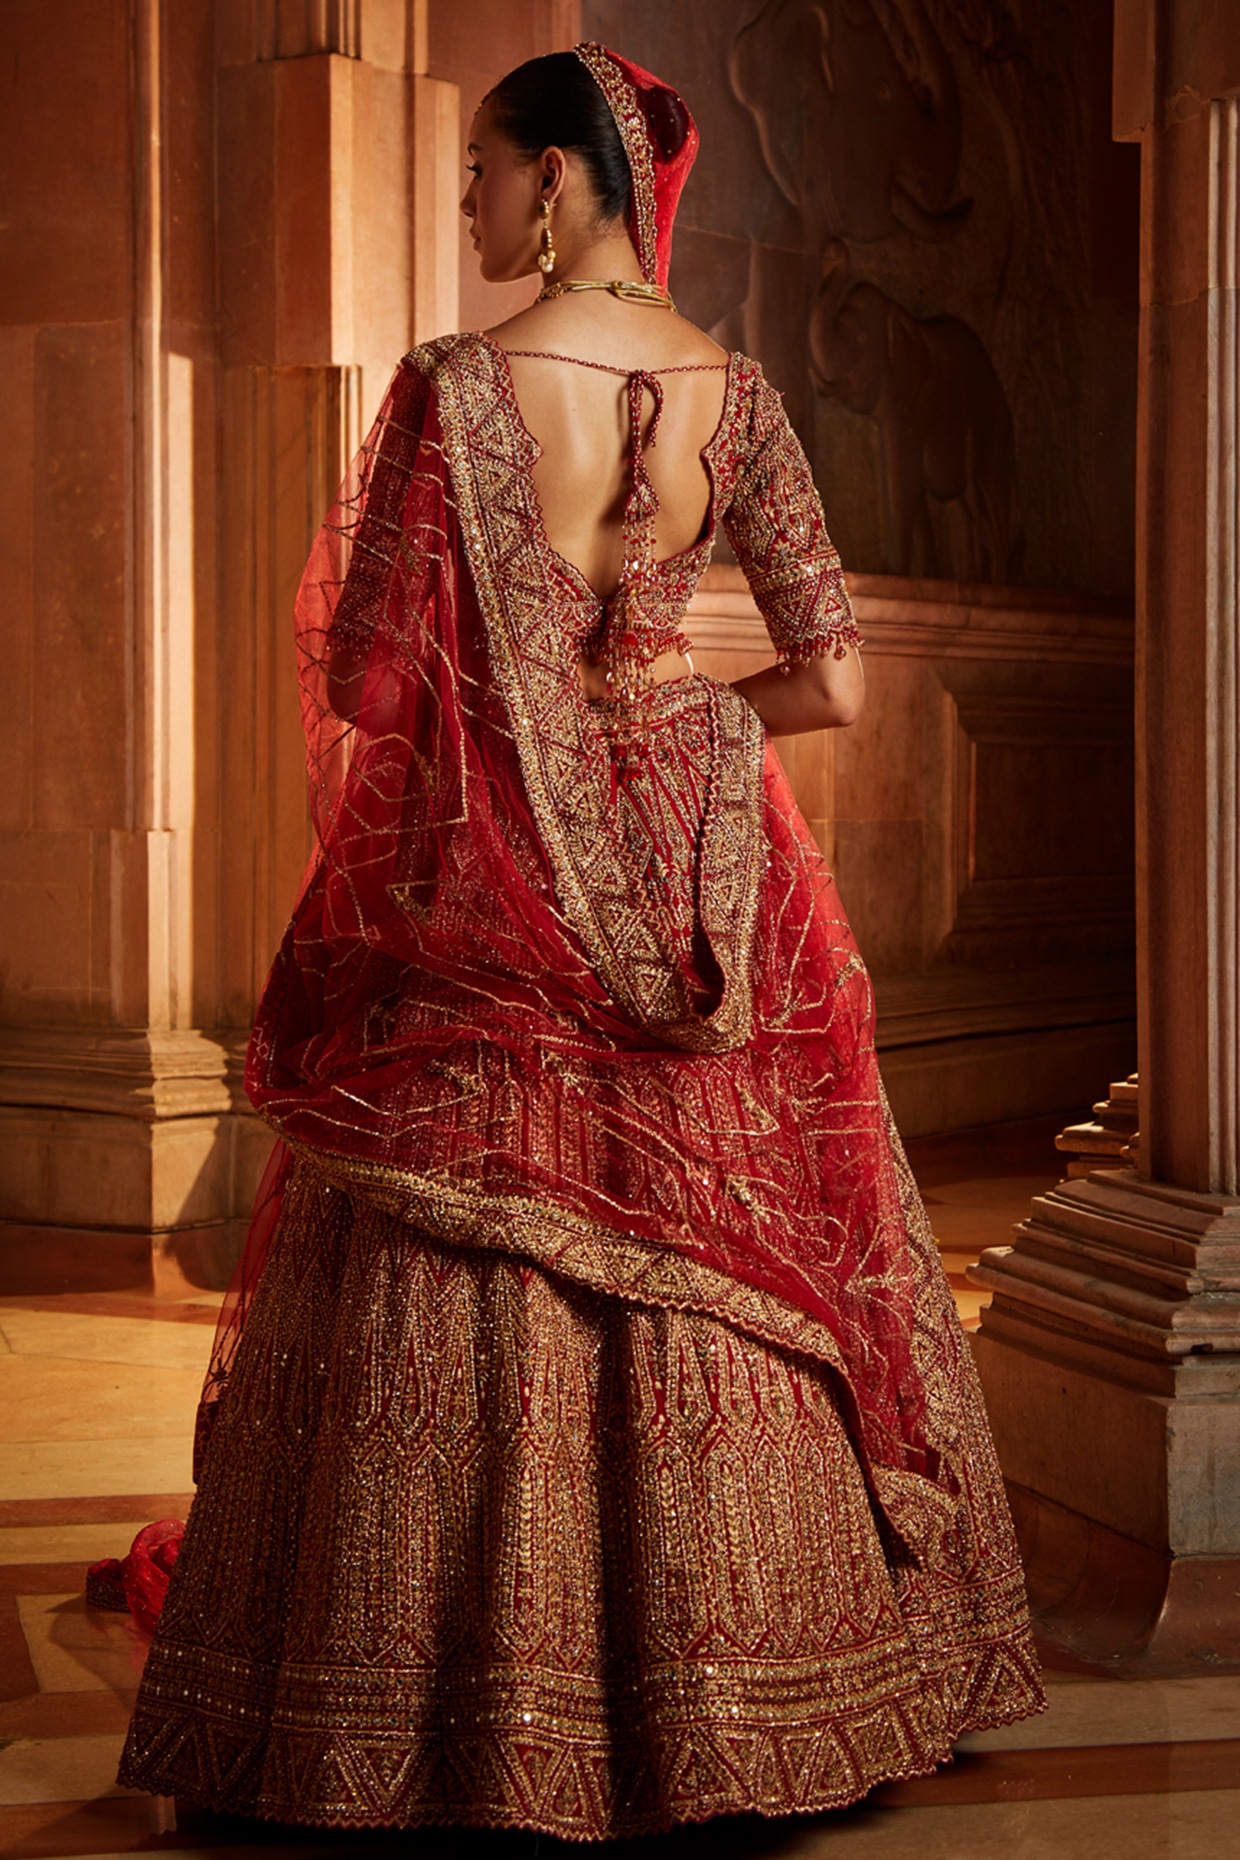 15 Stunning Lehenga Styles And Outfit Ideas For Weddings In 2023